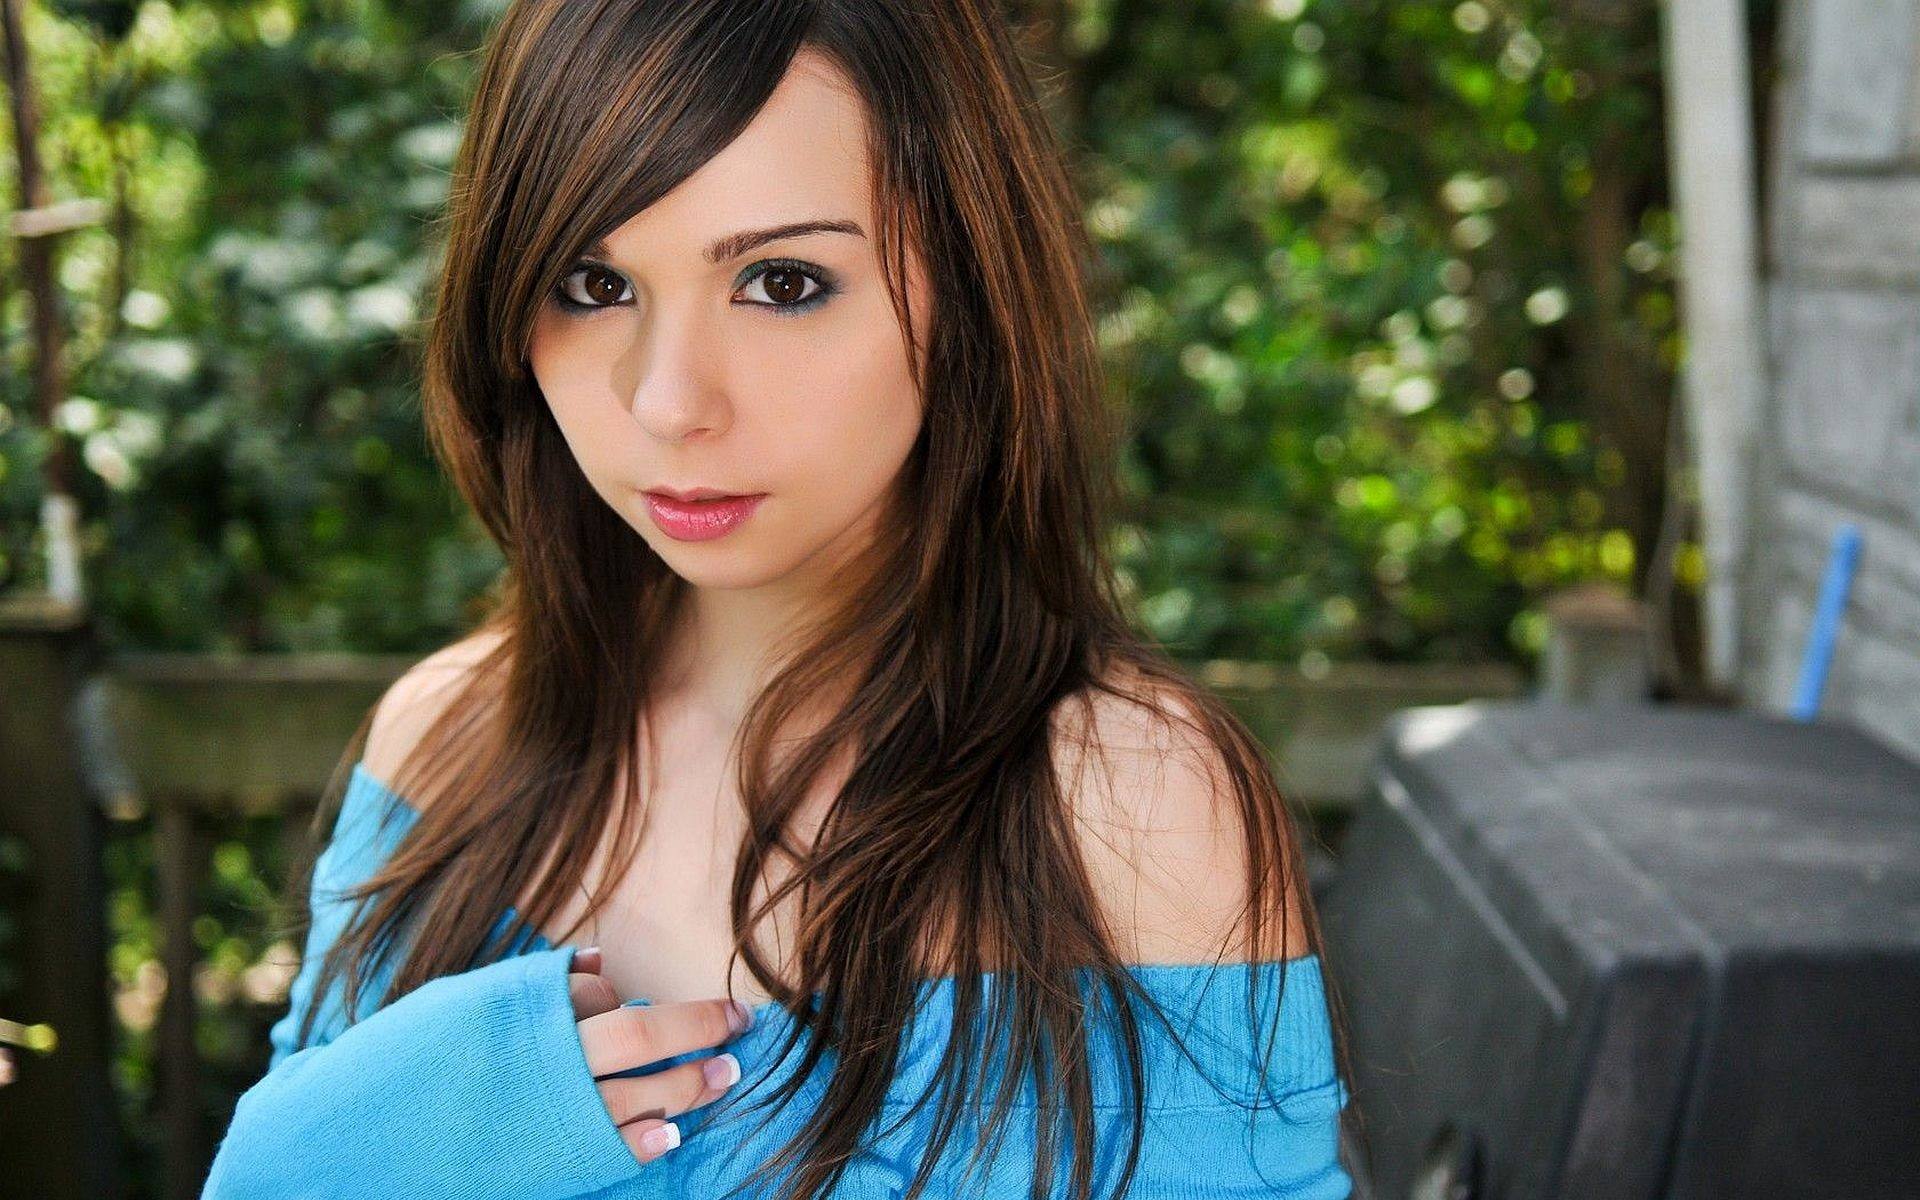 22 Extraordinary Facts About Ariel Rebel - Facts.net